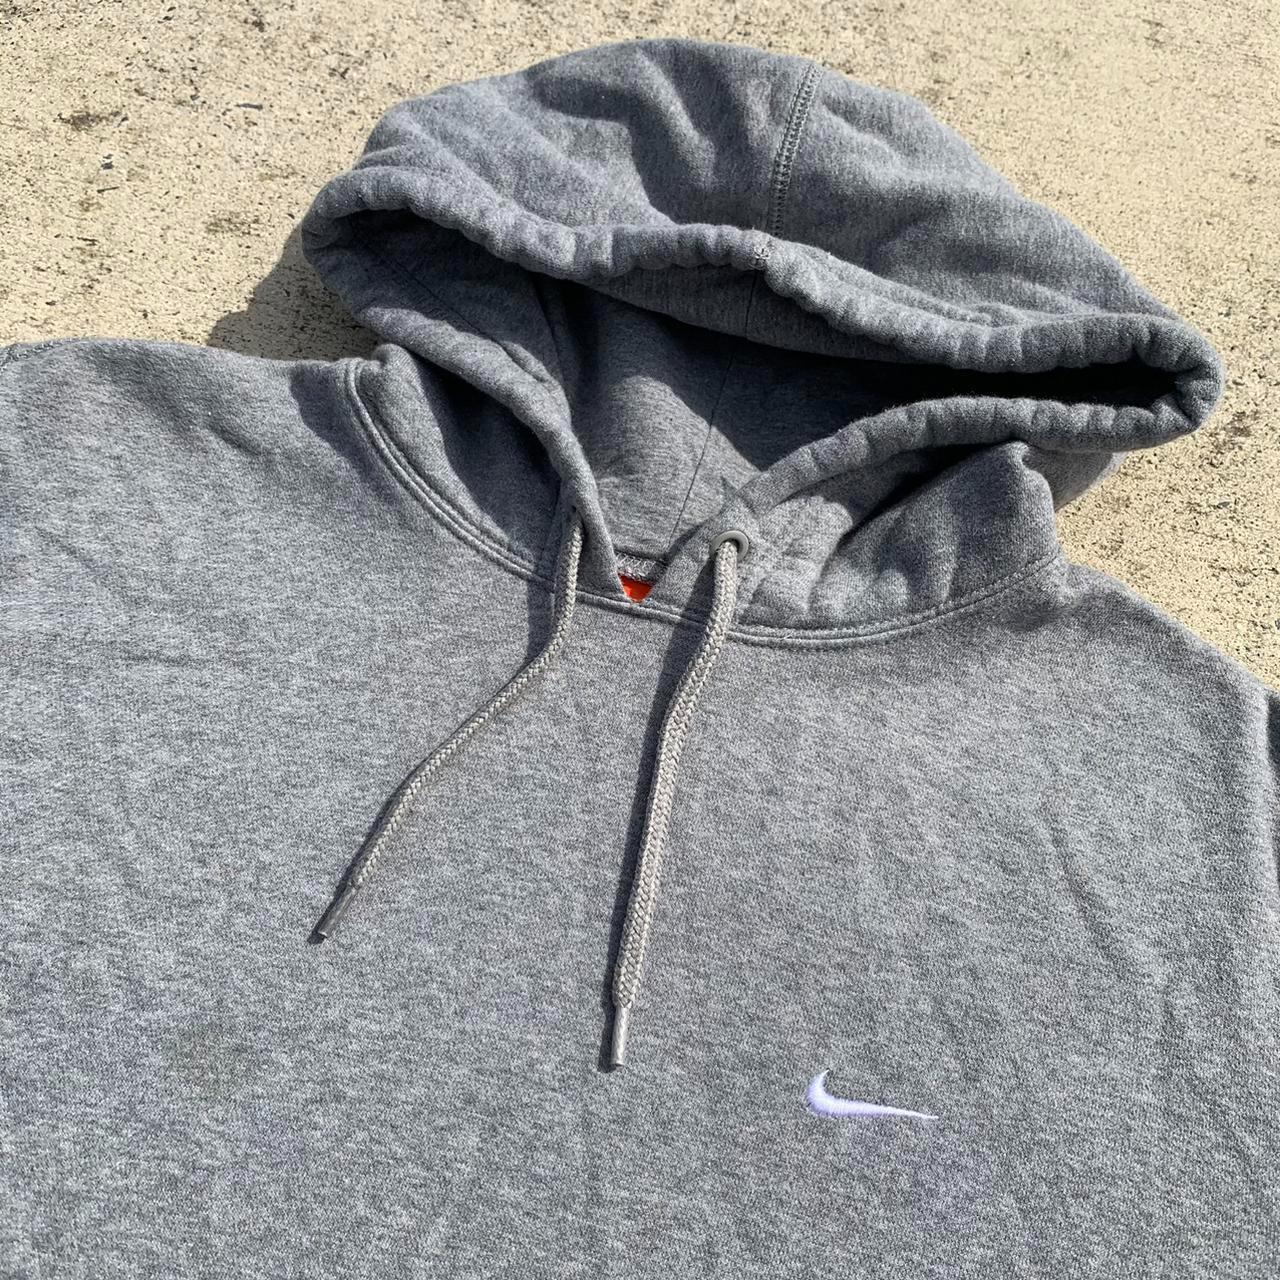 Product Image 2 - Nike essentials swoosh hoodie
Condition: used,